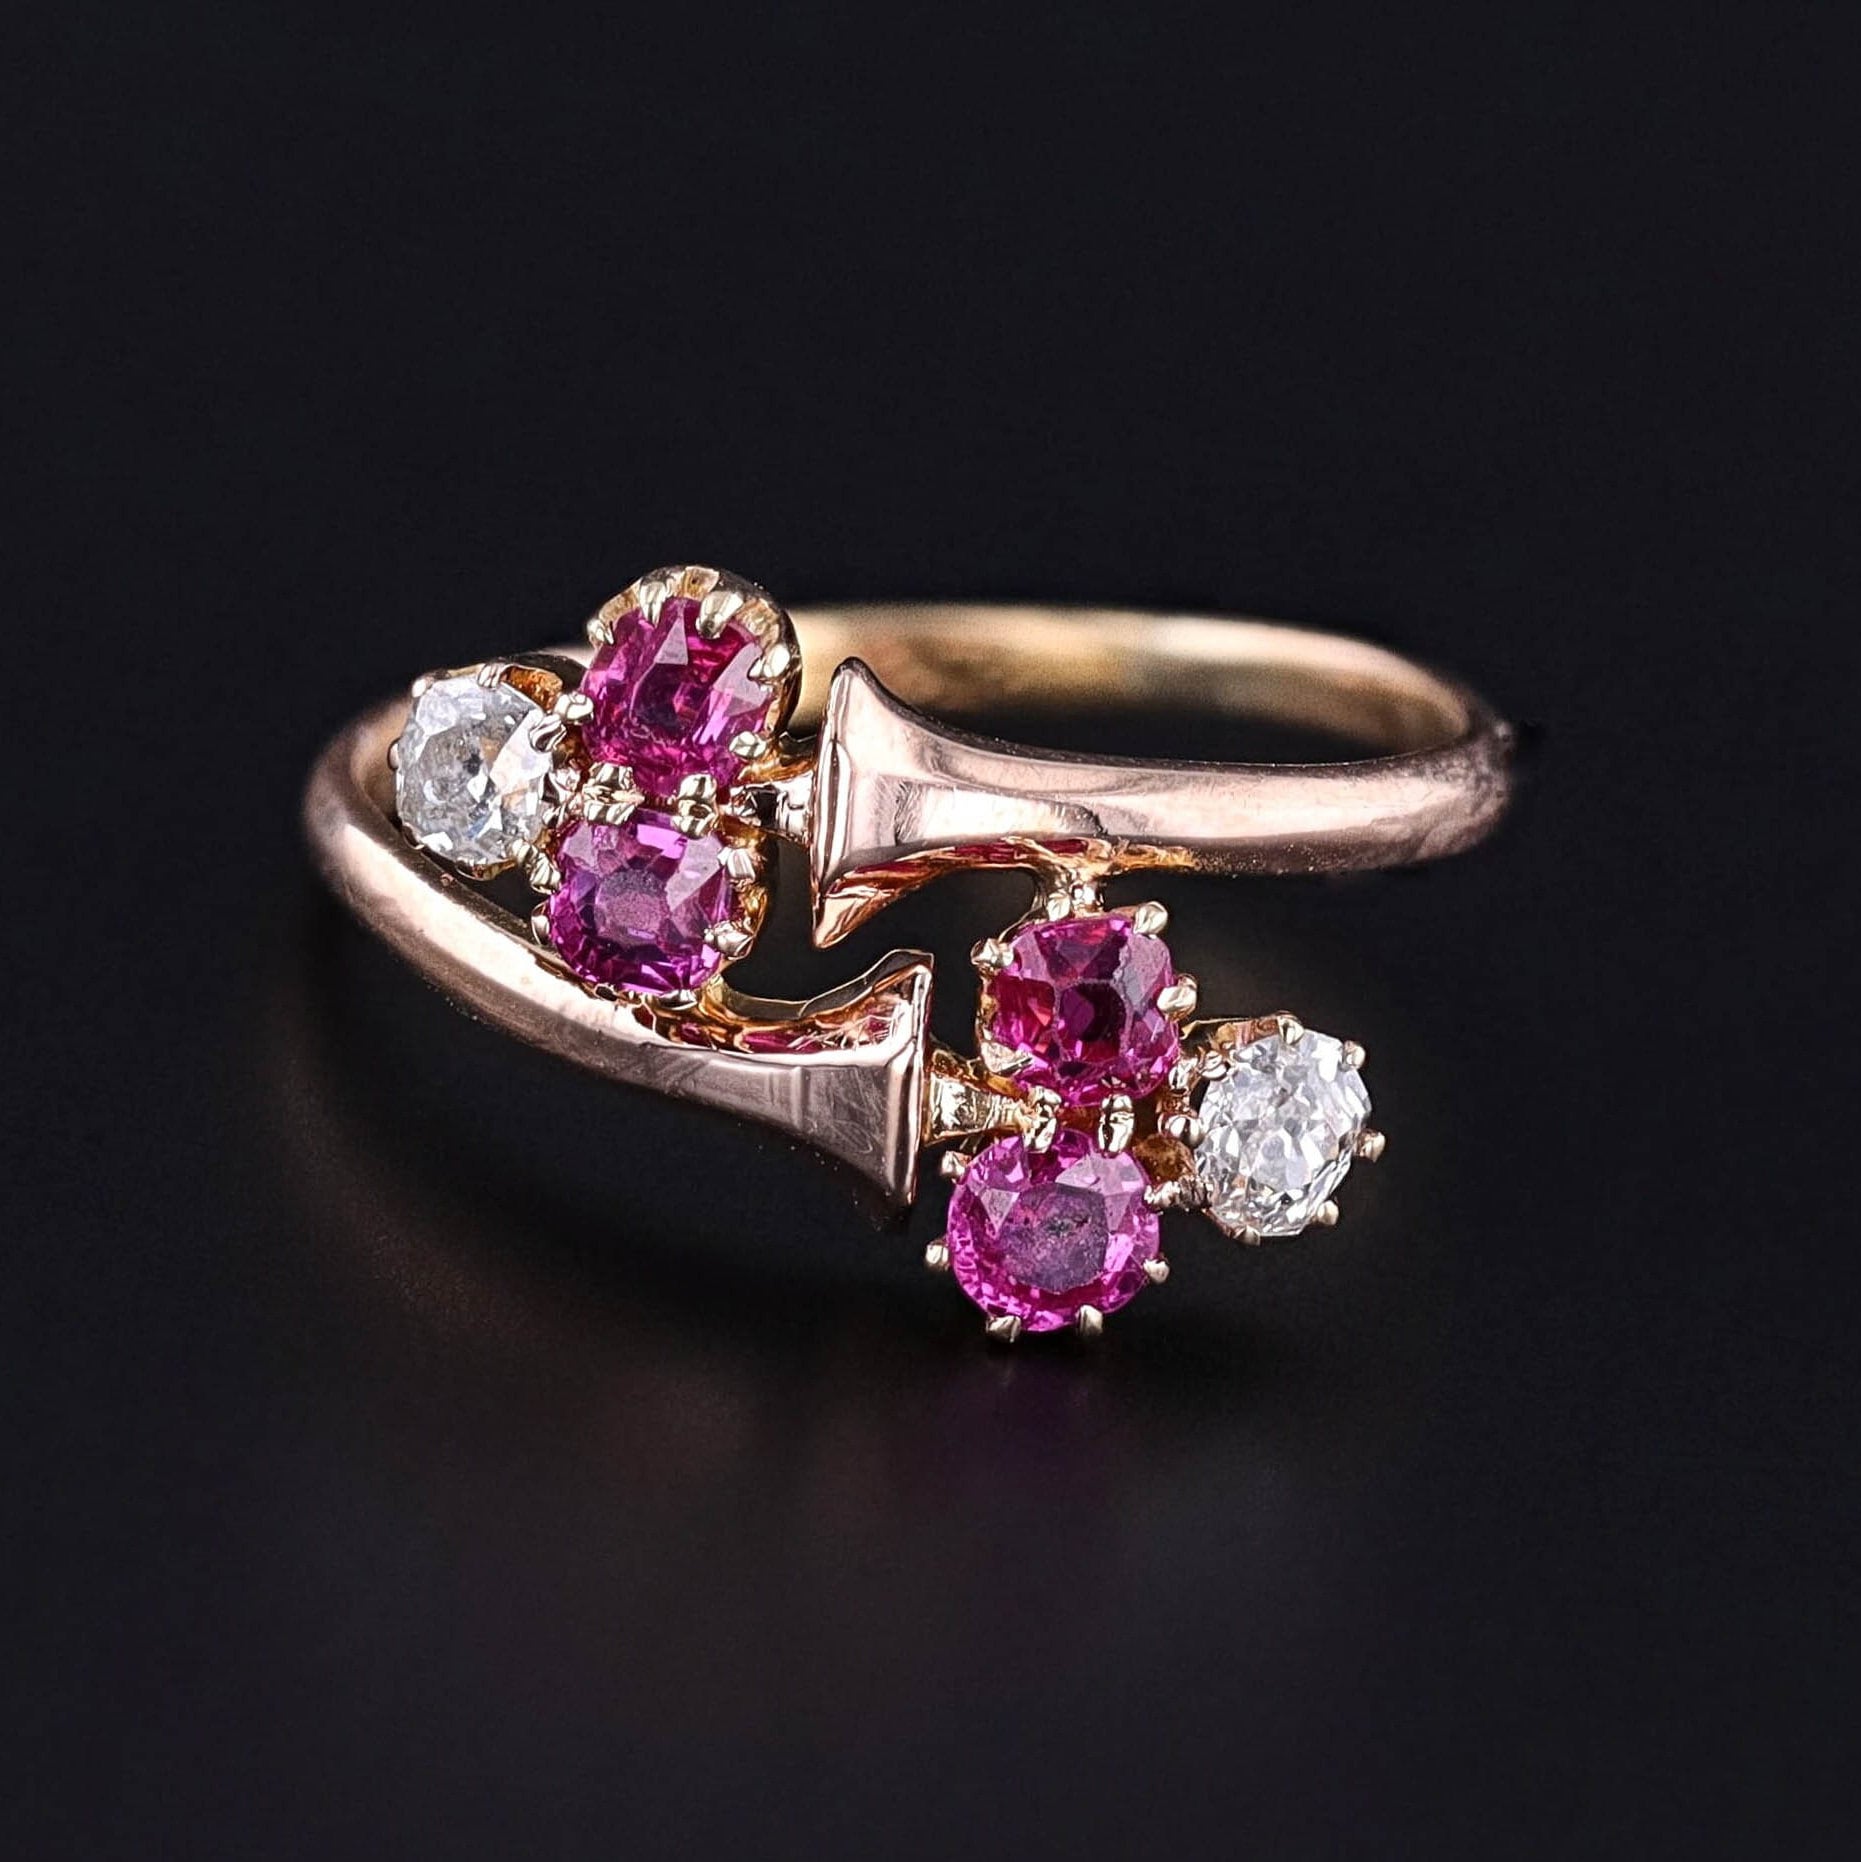 Antique Ruby and Diamond Crossover Ring from the late Victorian era showcasing two ruby and diamond trefoils set in 18k rose gold. A perfect ring for any antique jewelry collector or anyone with a love of fine jewelry.